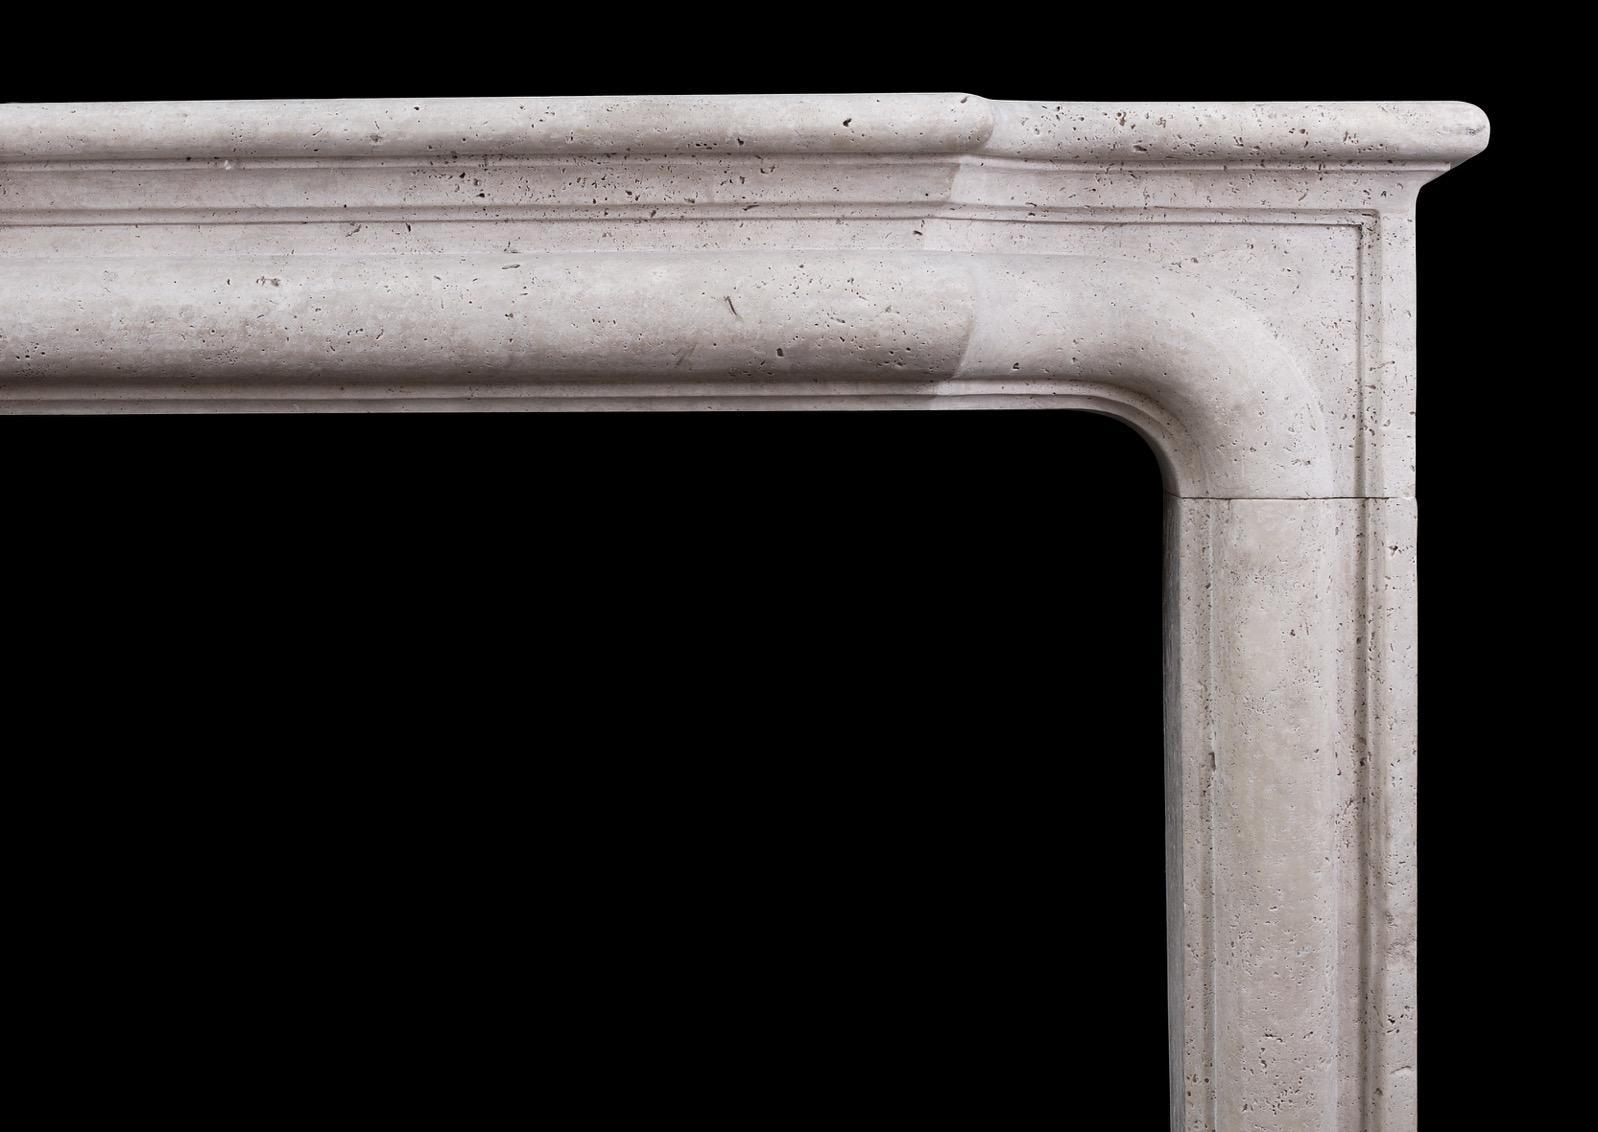 A substantial French Boudin fireplace in light travertine stone, with moulded jambs and shaped moulded frieze. An imposing yet graceful piece. A copy of an original.
N.B. May be subject to an extended lead time.

Measures: Shelf width 1535 mm 60 3/8